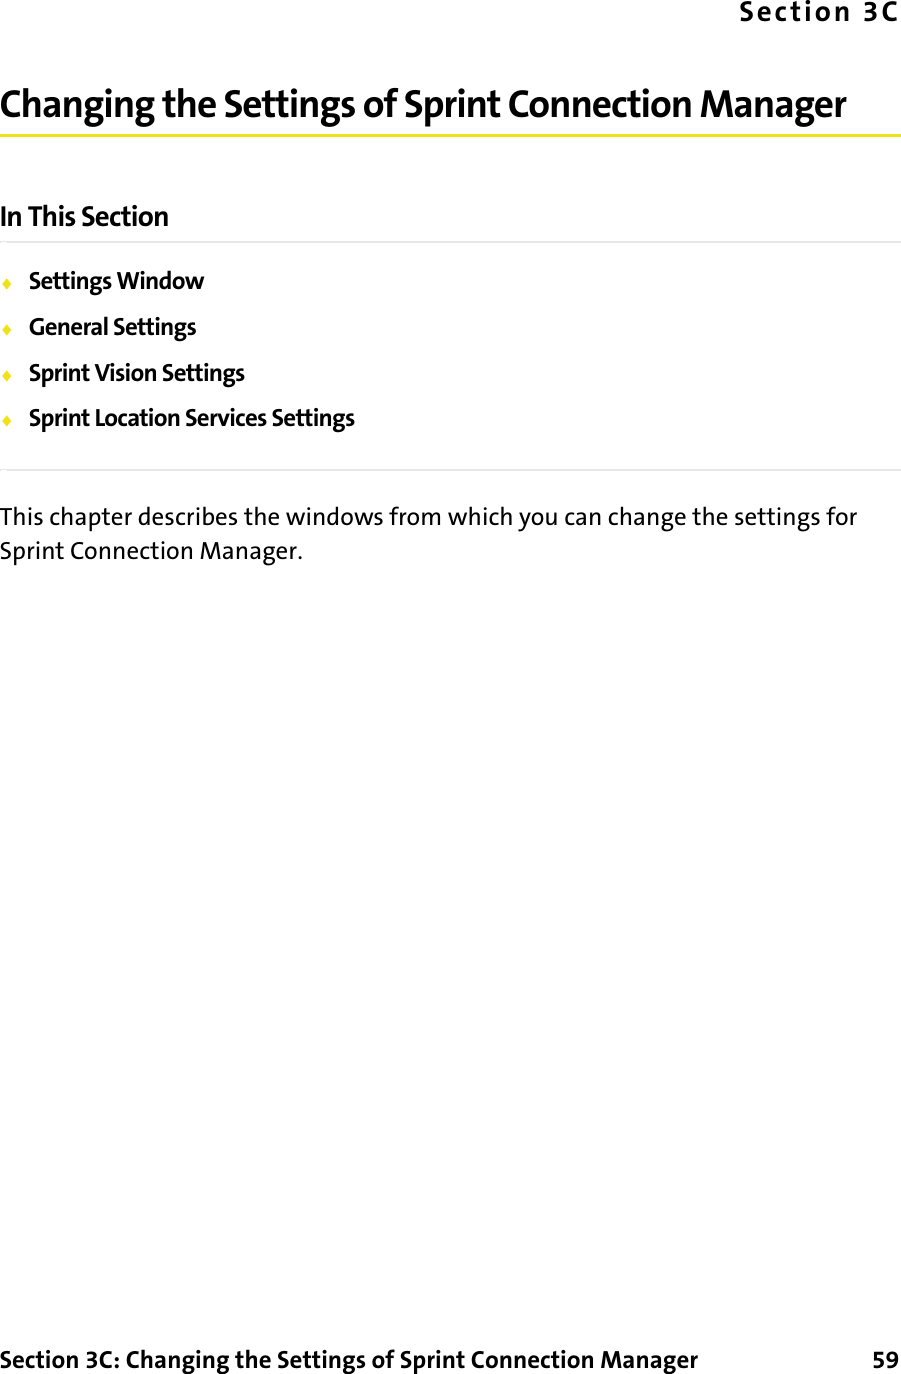 Section 3C: Changing the Settings of Sprint Connection Manager      59Section 3CChanging the Settings of Sprint Connection ManagerIn This Section⽧Settings Window⽧General Settings⽧Sprint Vision Settings⽧Sprint Location Services SettingsThis chapter describes the windows from which you can change the settings for Sprint Connection Manager.